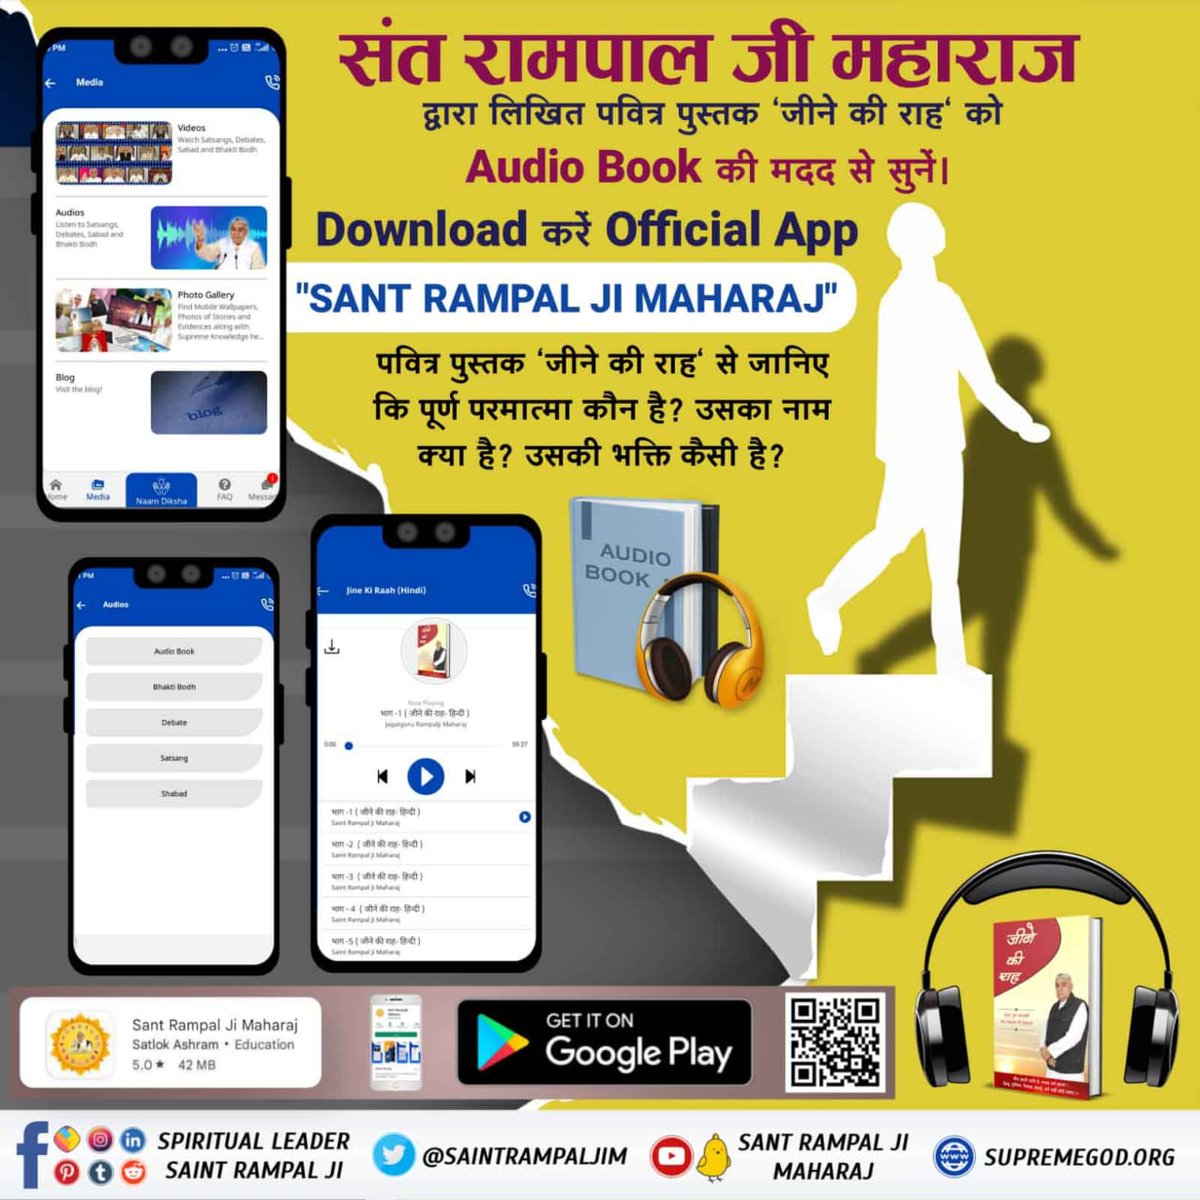 #AudioBook_JeeneKiRah Know from the holy book 'Jeene Ki Raah' who is the Supreme God? What is His name? How is His worship? To listen to the Audio Book, download the Official App 'SANT RAMPAL JI MAHARAJ' #GodMorningSunday